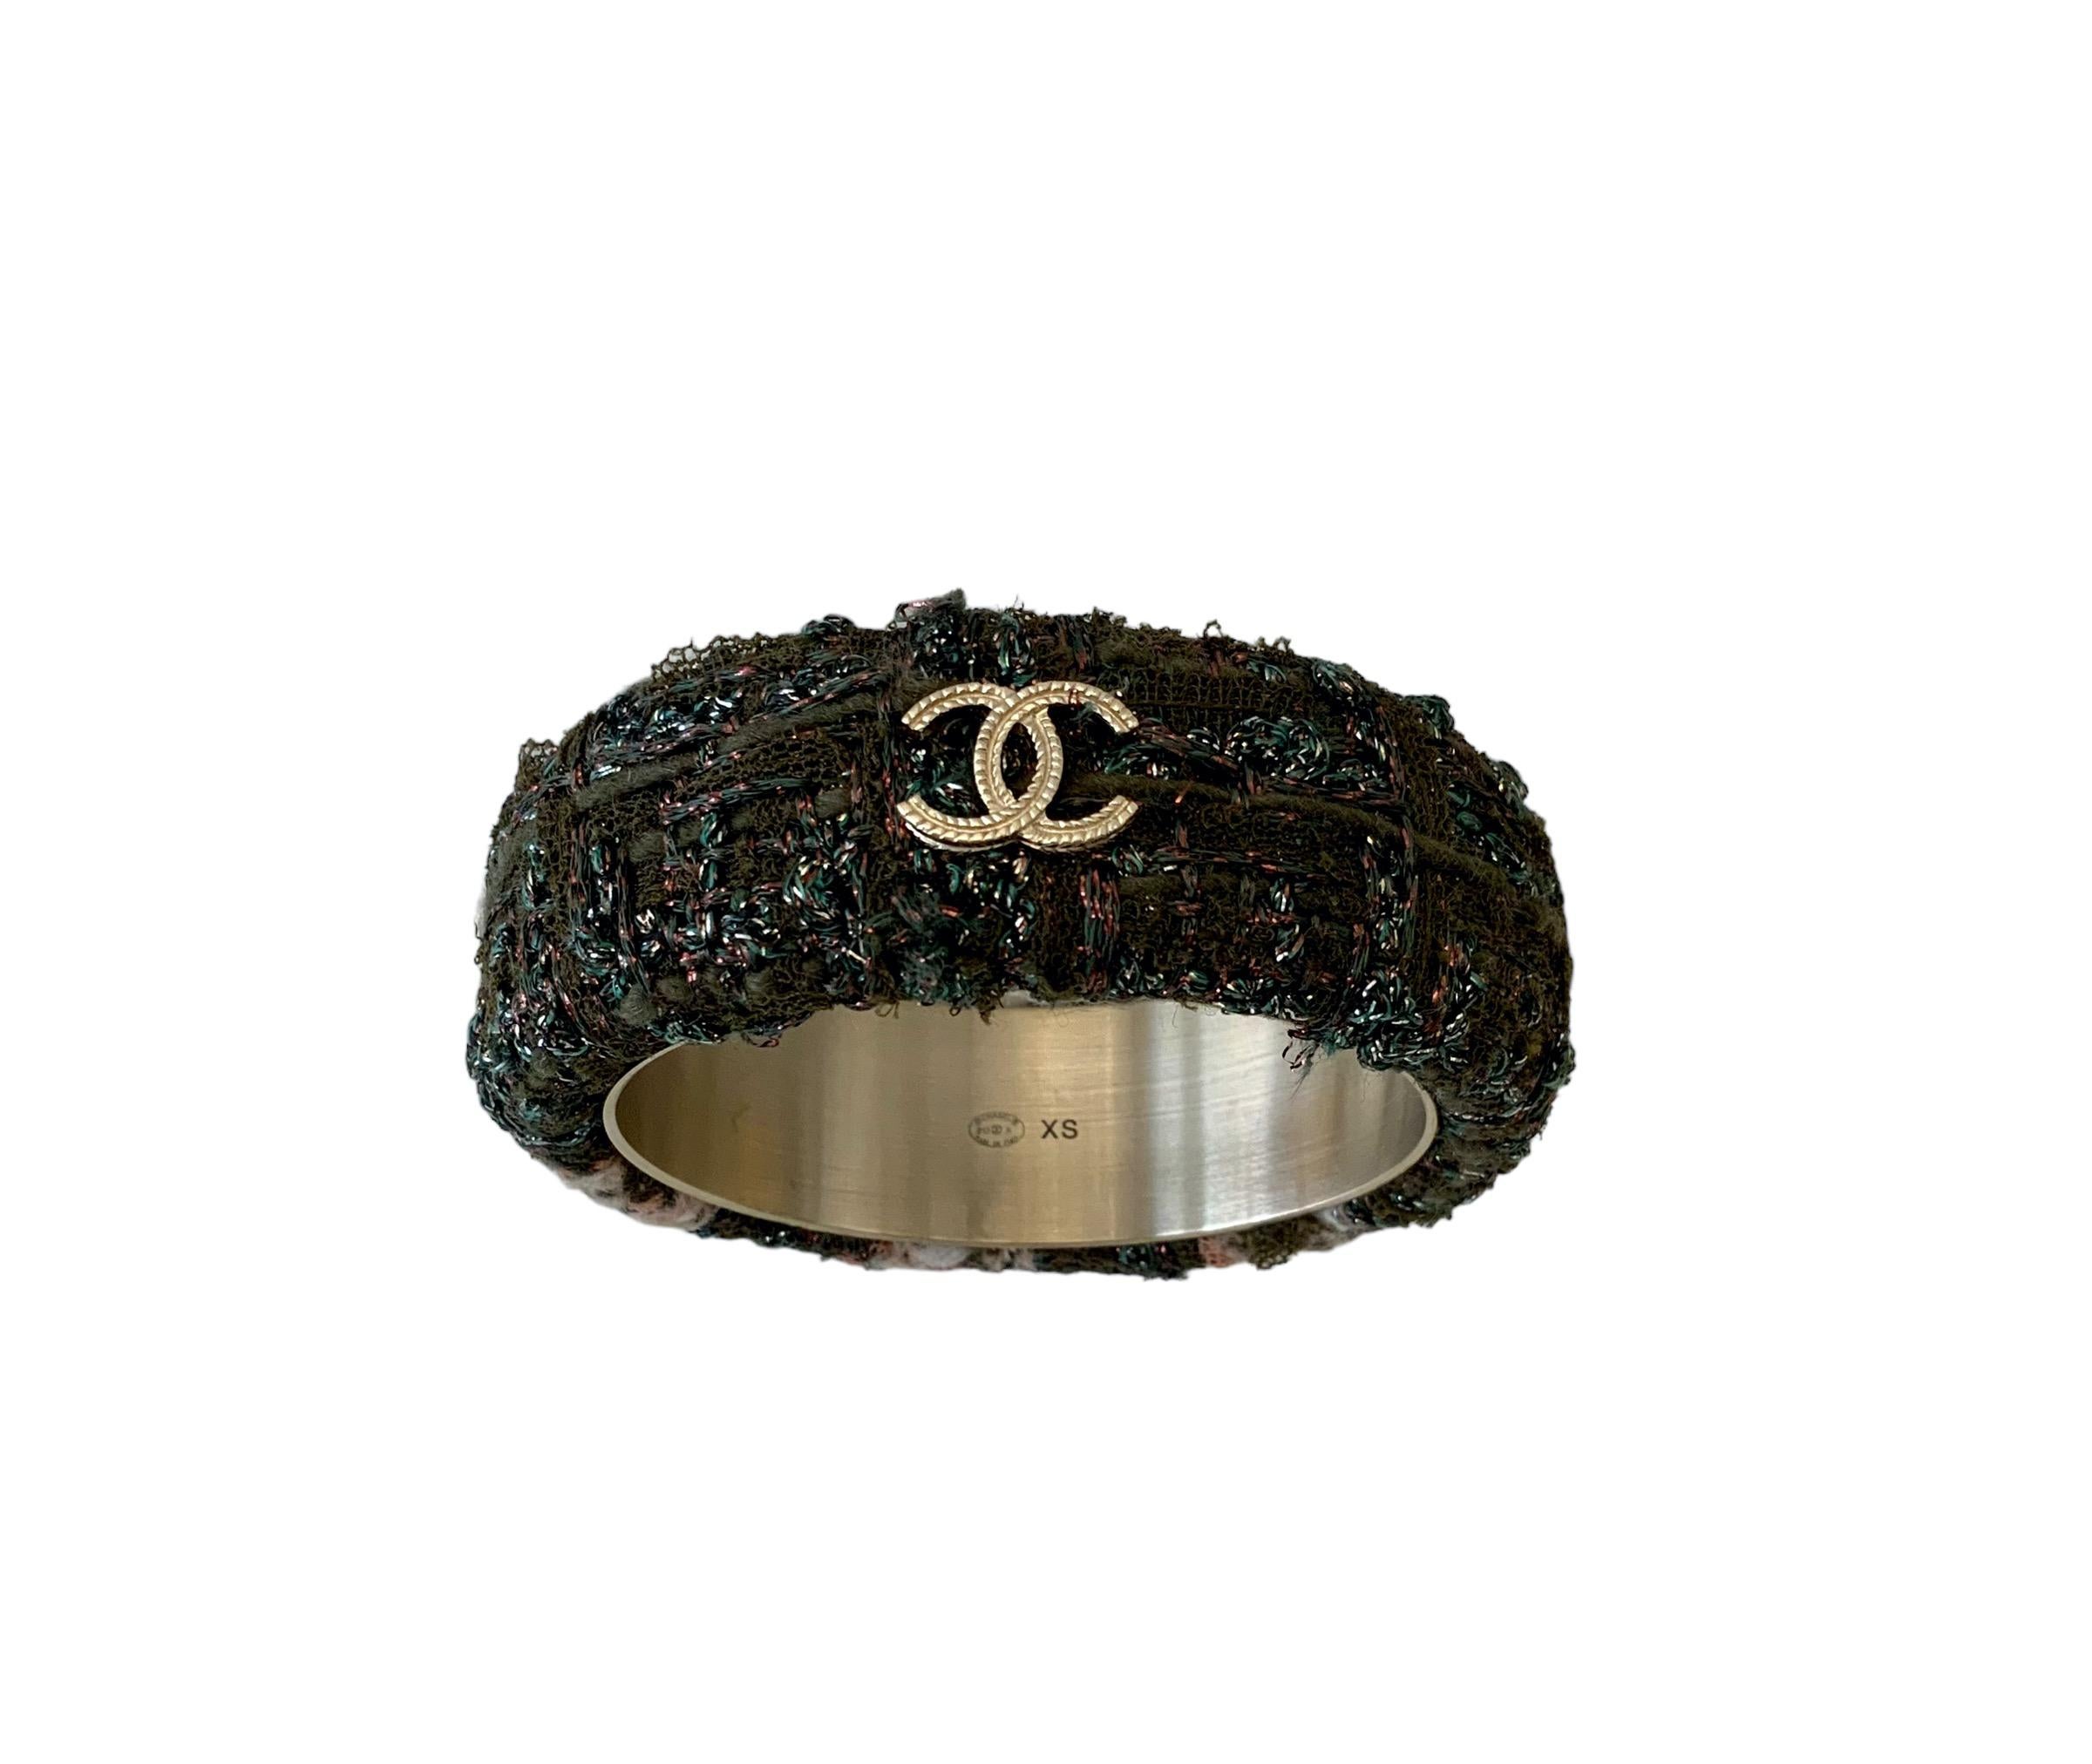 Beautiful tweed bangle from the 2013 Fall Collection from Chanel.

Year: Fall 2013
Metal: Steel
Size: XS
Measurements: 
Height: 2.5cms - approx. 1